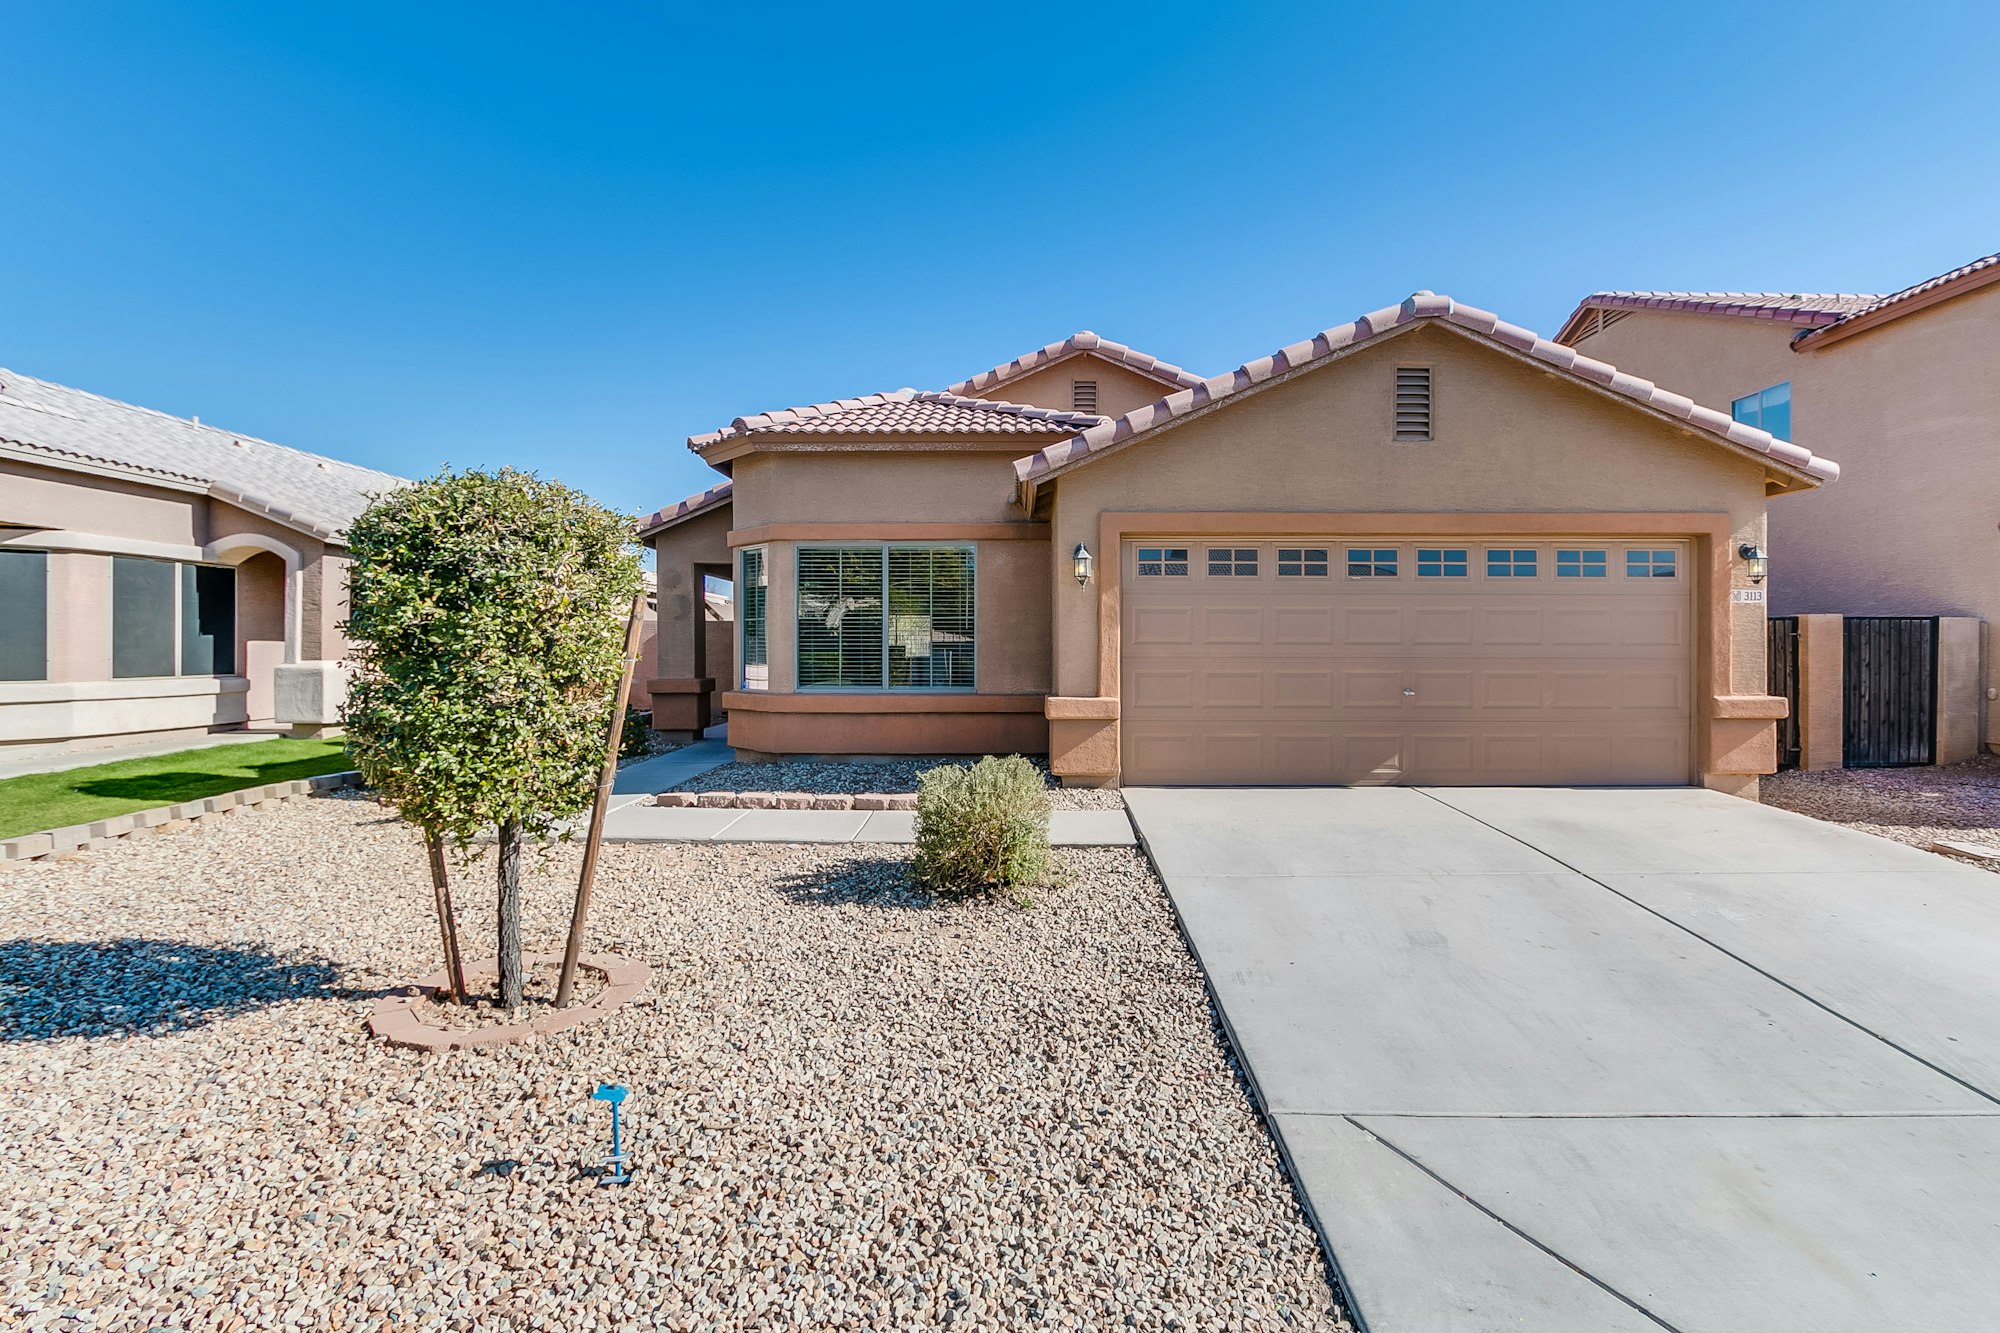 Photo 1 of 31 - 3113 S 93rd Ave, Tolleson, AZ 85353